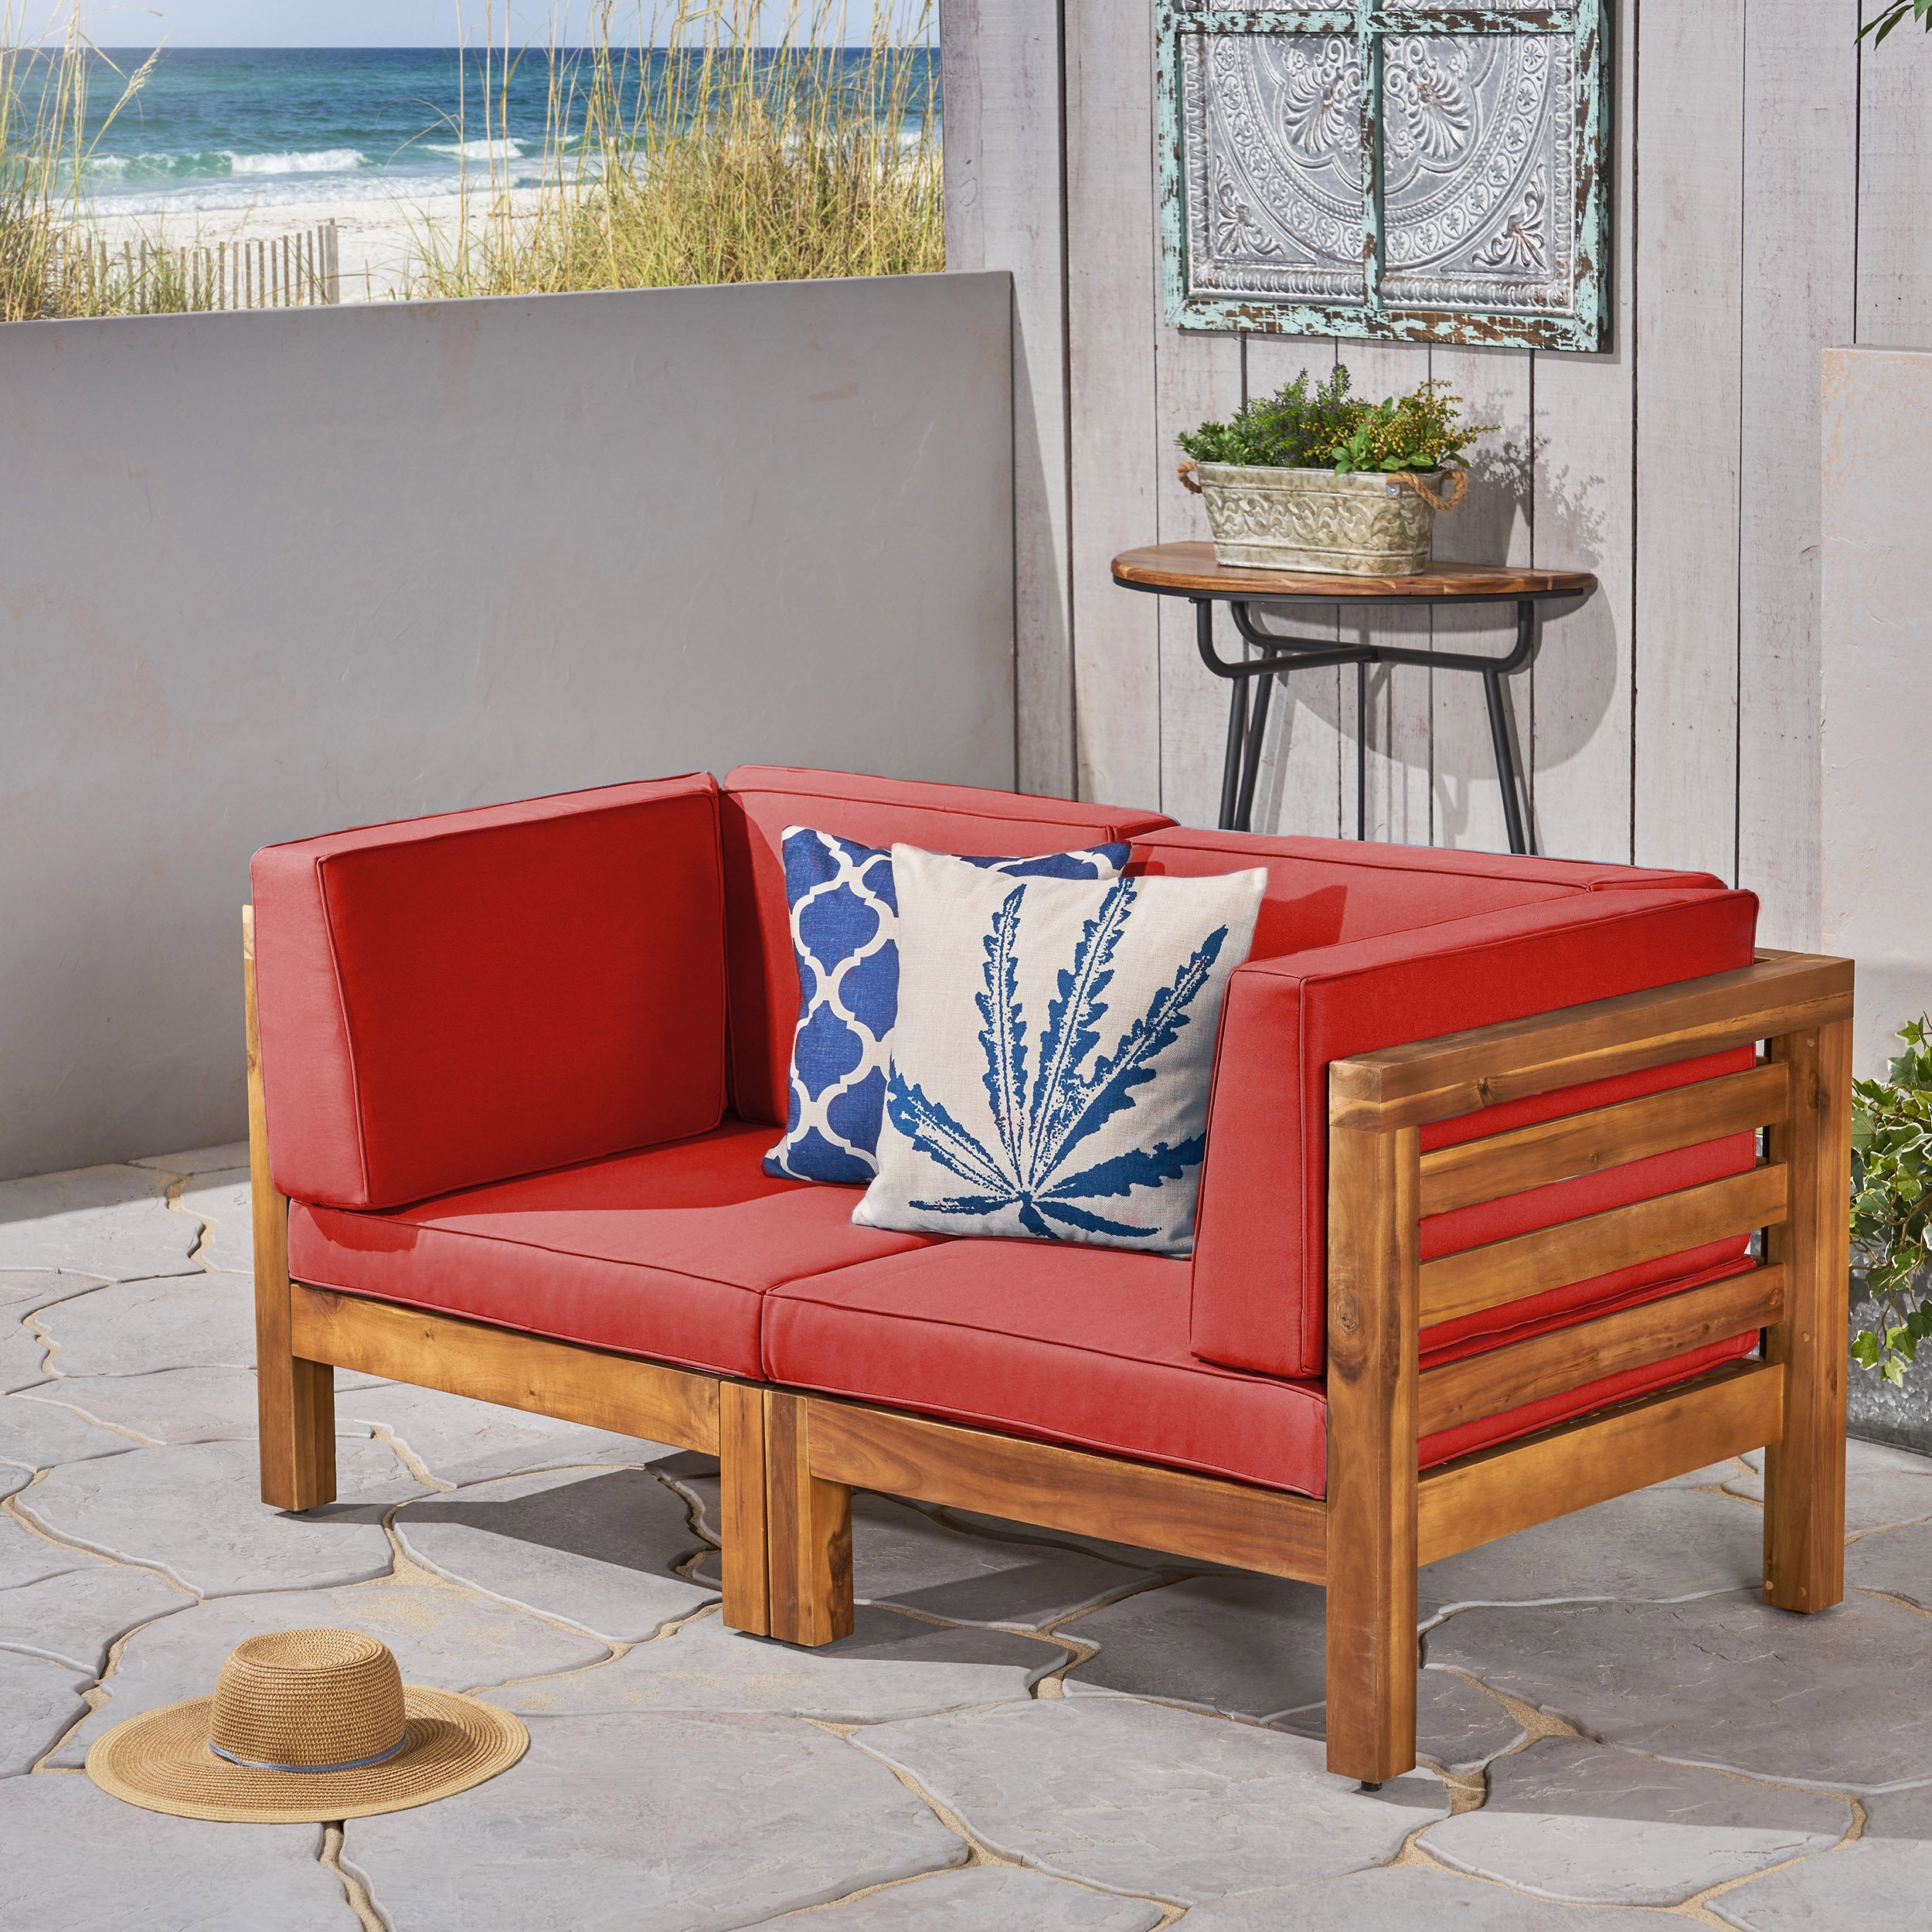 Great Deal Furniture Dawson Outdoor Sectional Loveseat Set - 2-Seater - Acacia Wood - Outdoor Cushions - Teak + Red